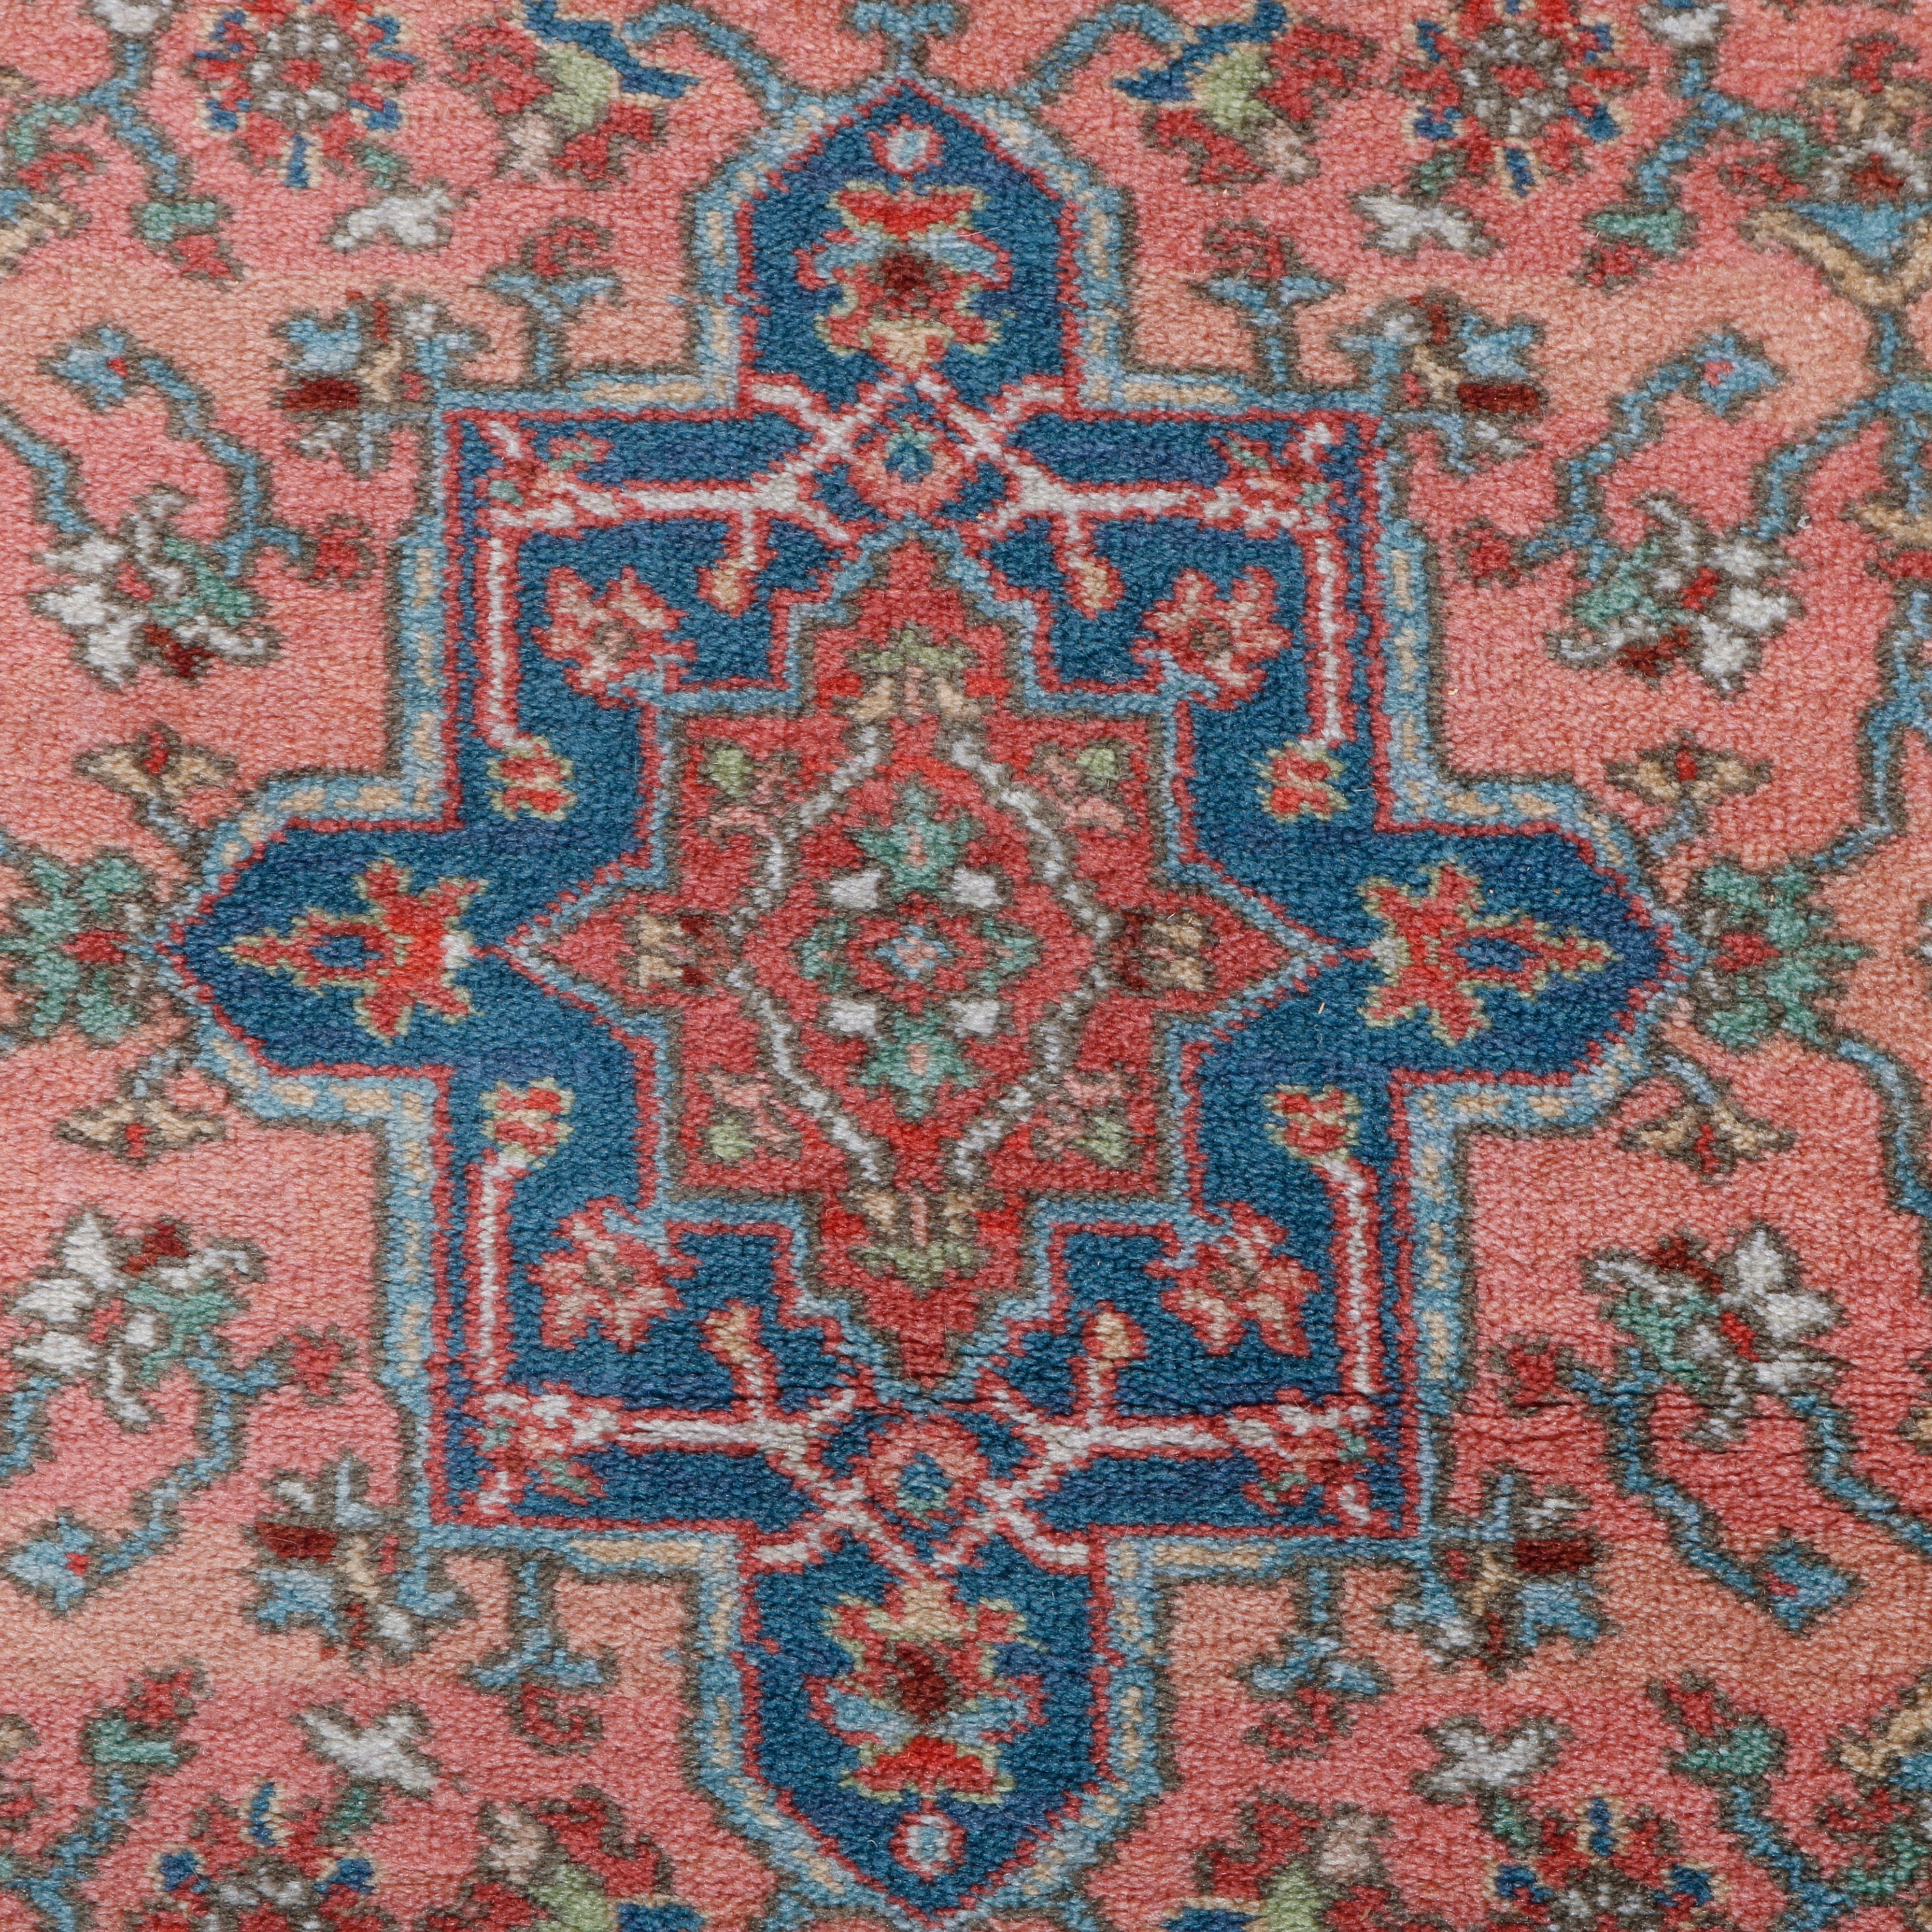 Karastan Kirman Oriental rug offers wool construction with central medallion and all-over detached floral spray on salmon red ground, original label, circa 1950

Measures: 63